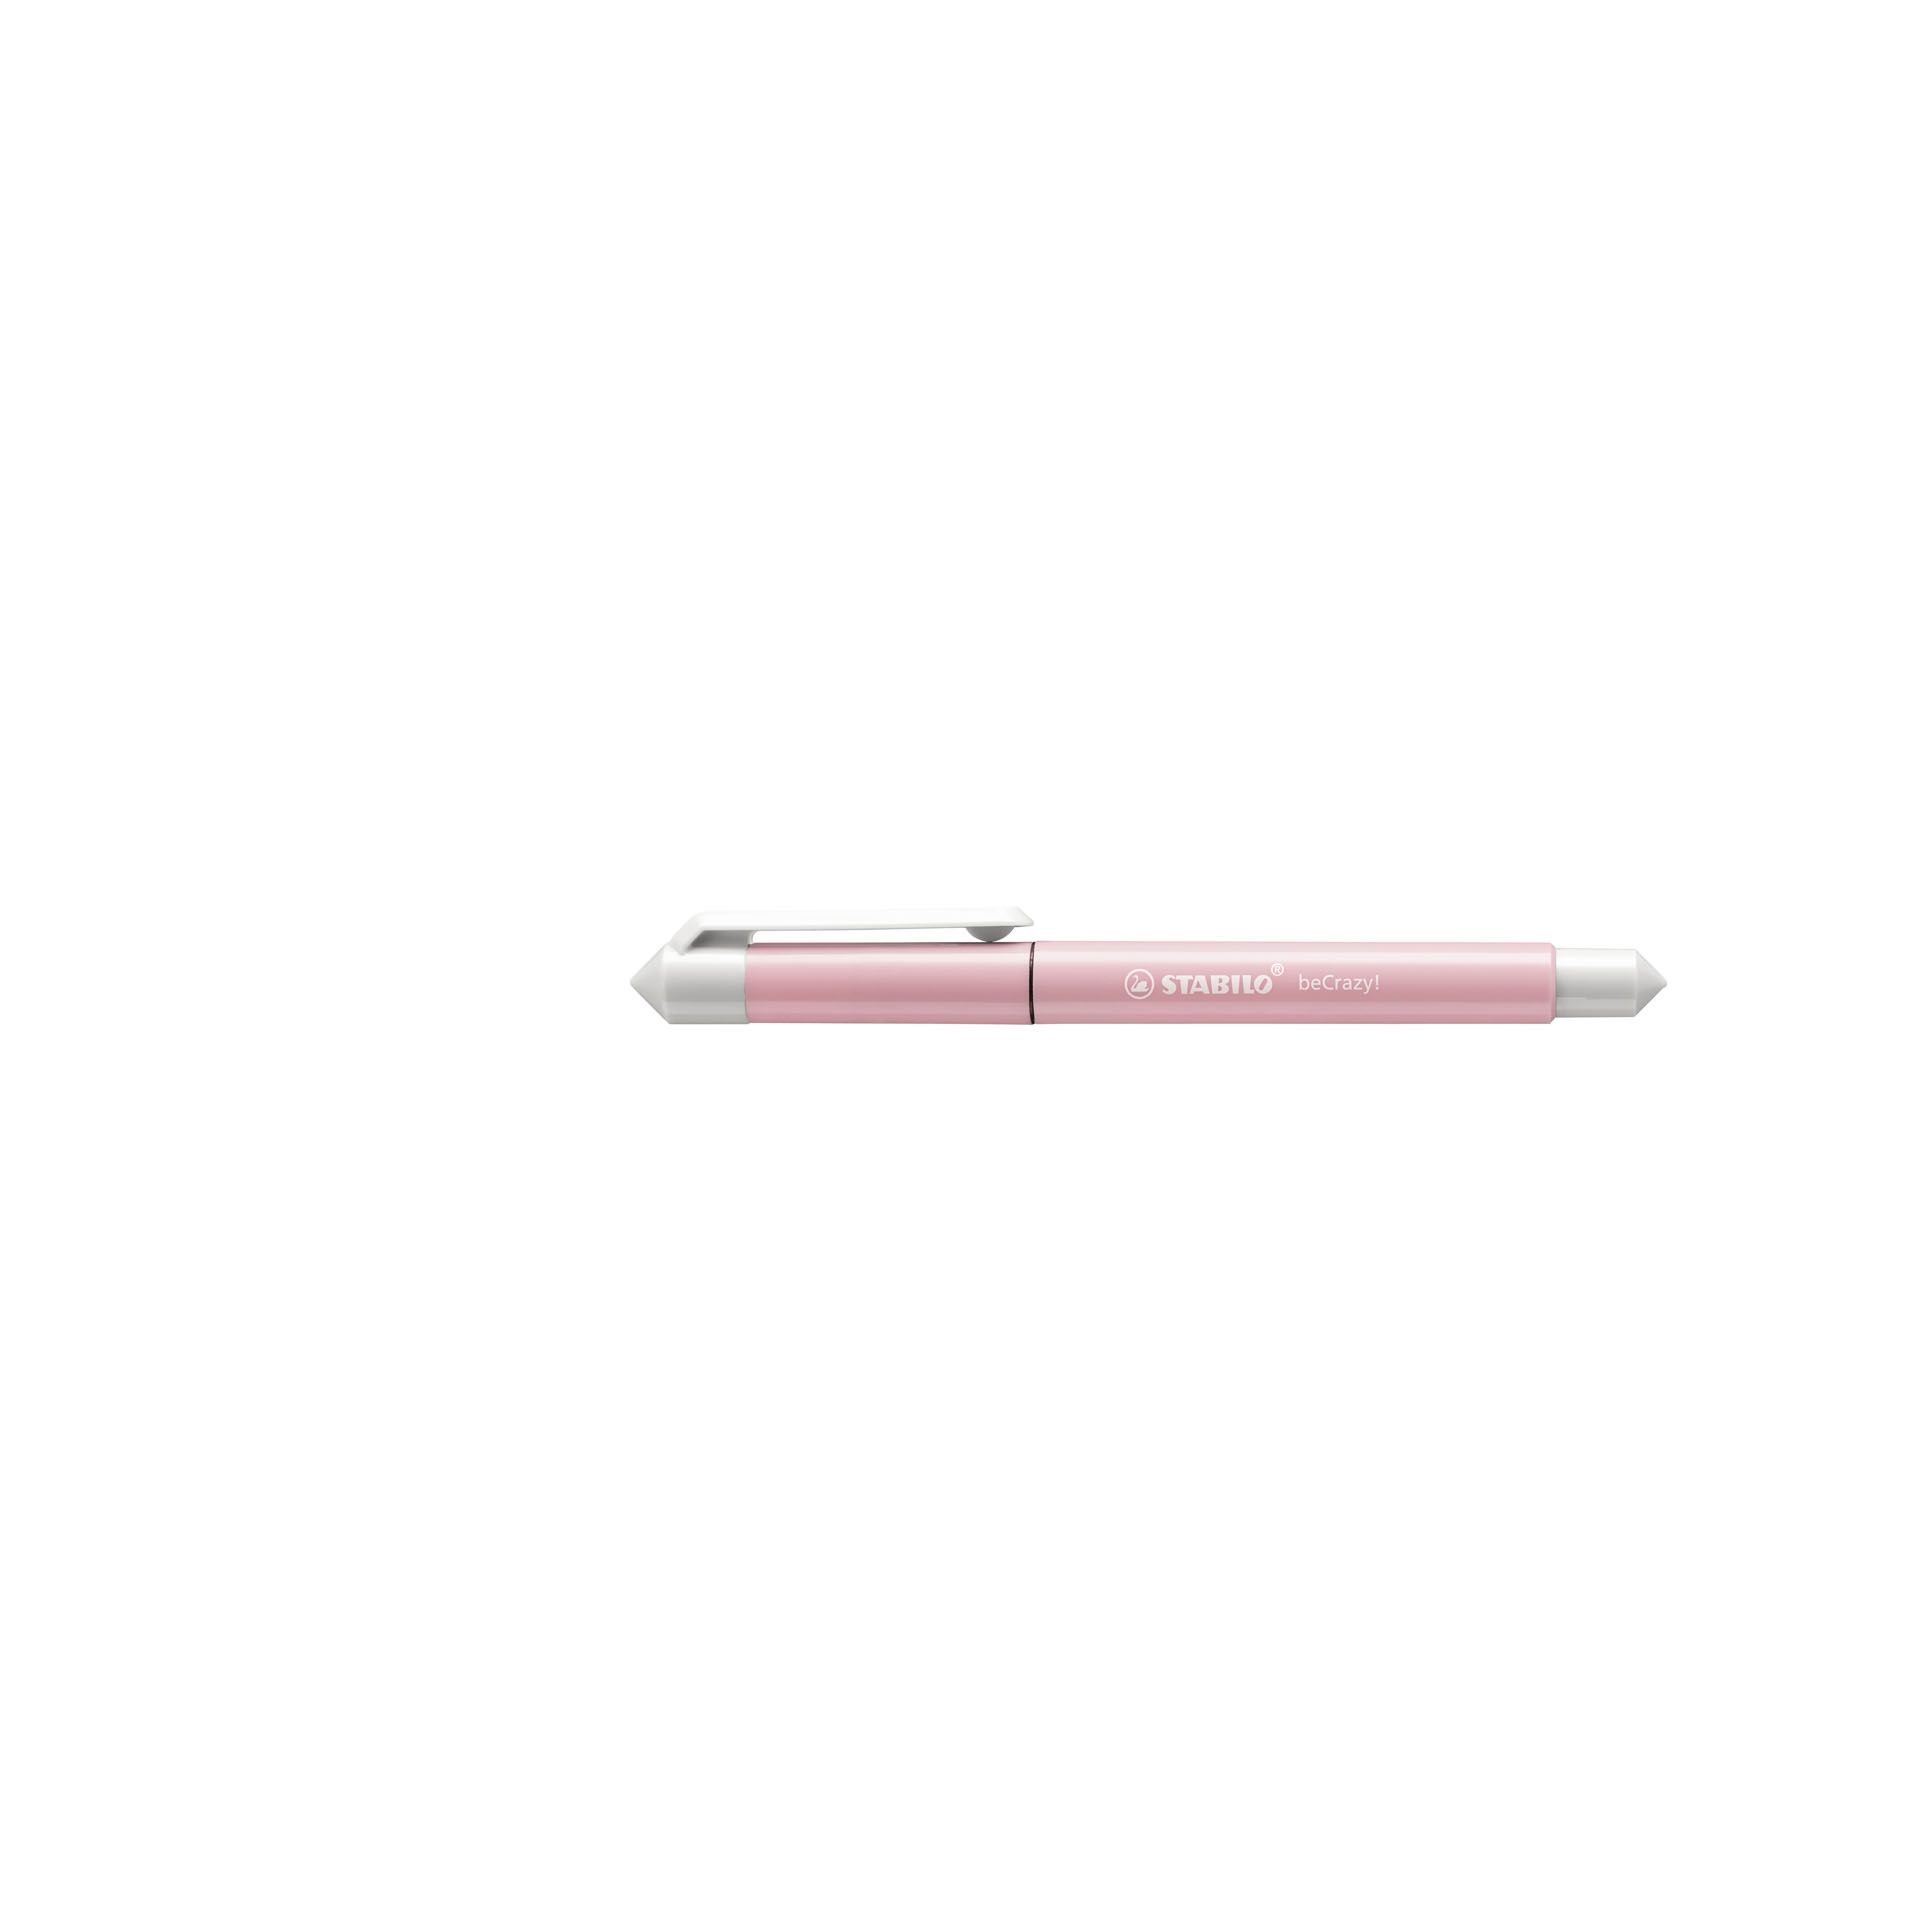 Penna Roller - STABILO beCrazy! Pastel in Rosa - 3 Cartucce Blu incluse, , large